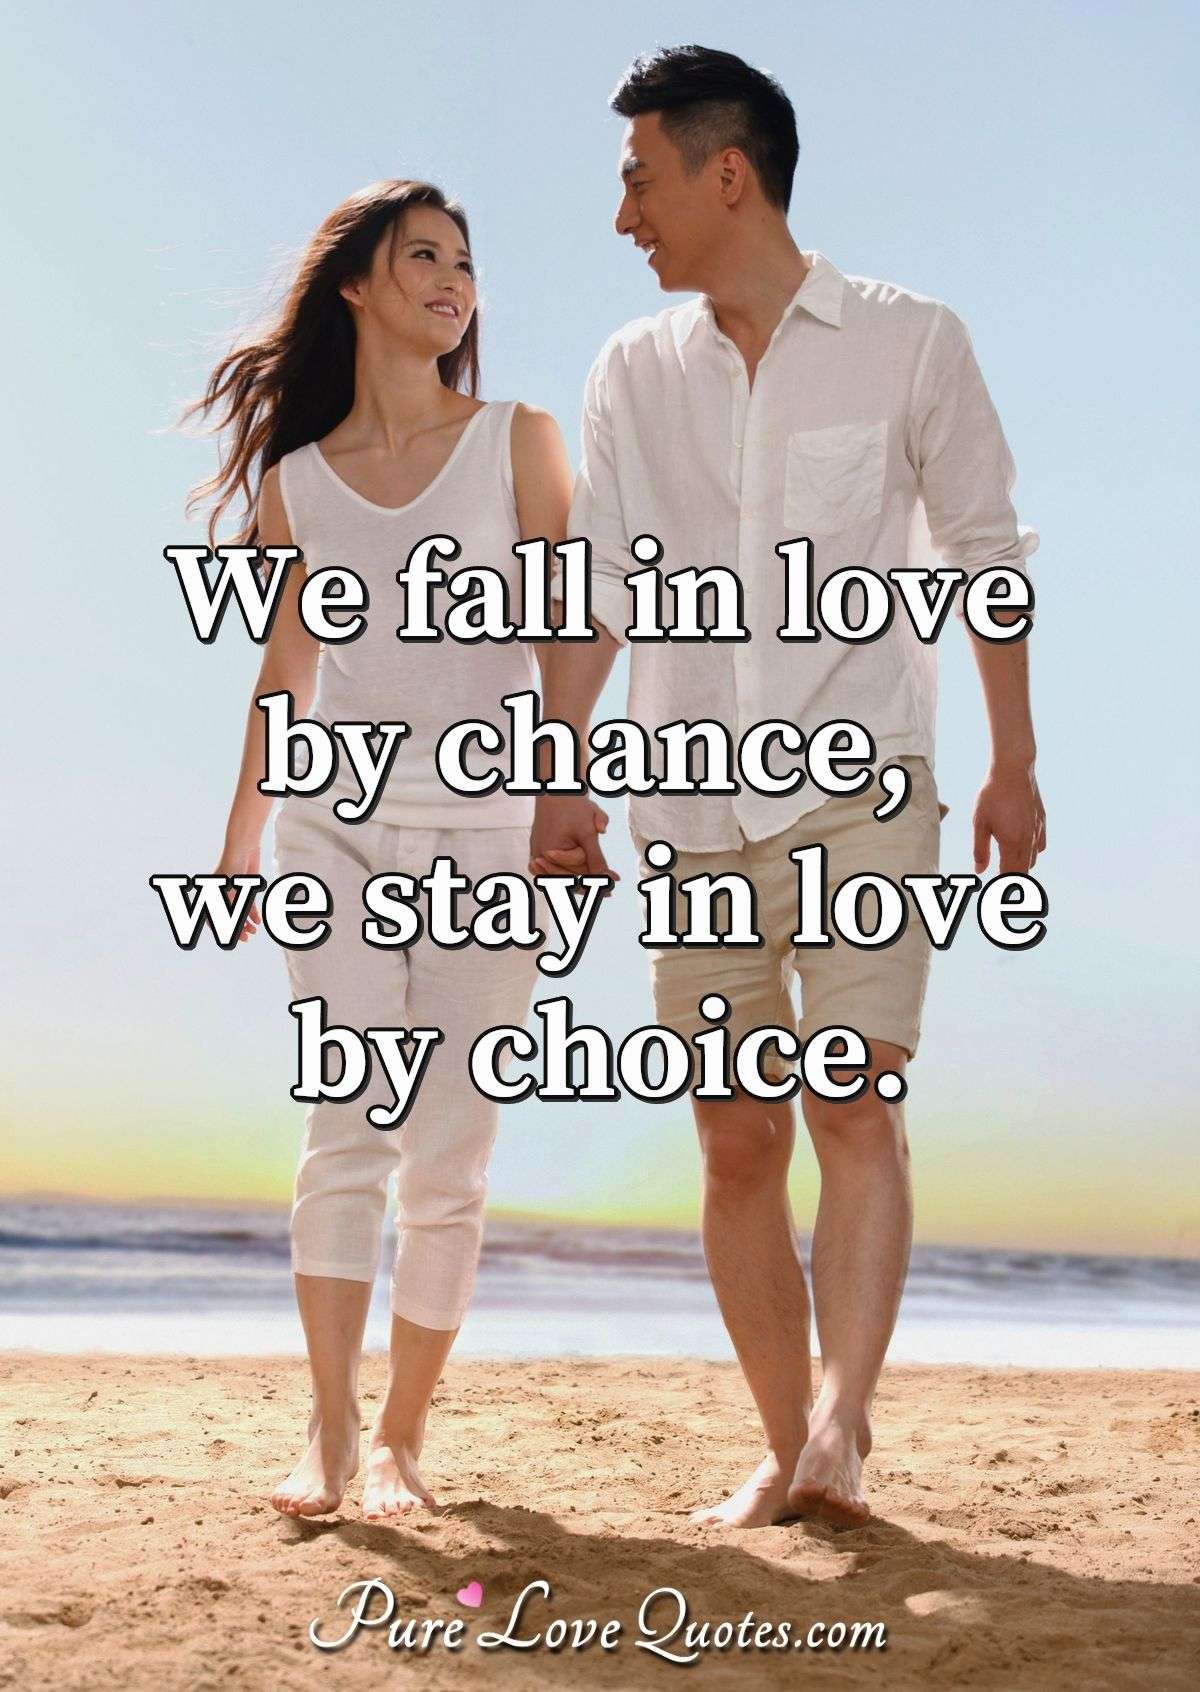 We fall in love by chance, we stay in love by choice. - Anonymous